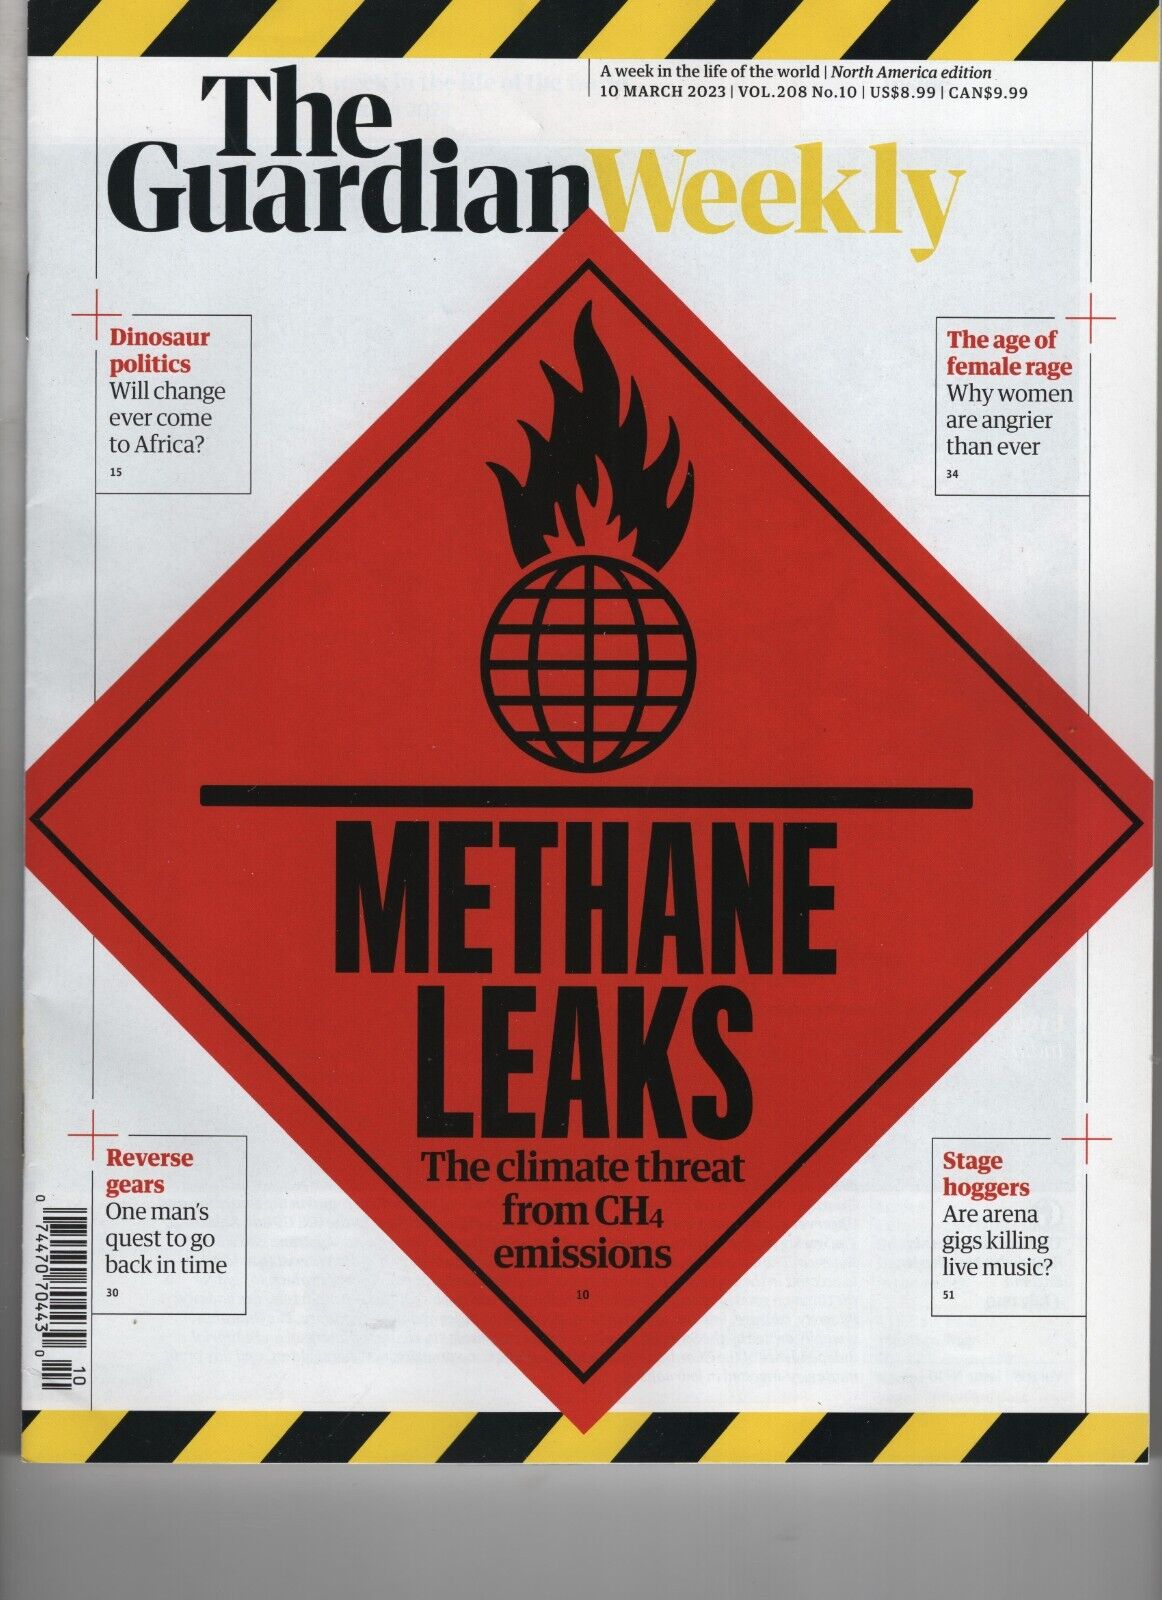 METHANE LEAKS THE GUARDIAN WEEKLY MAGAZINE MAR 10 2023 CLIMATE THREAT